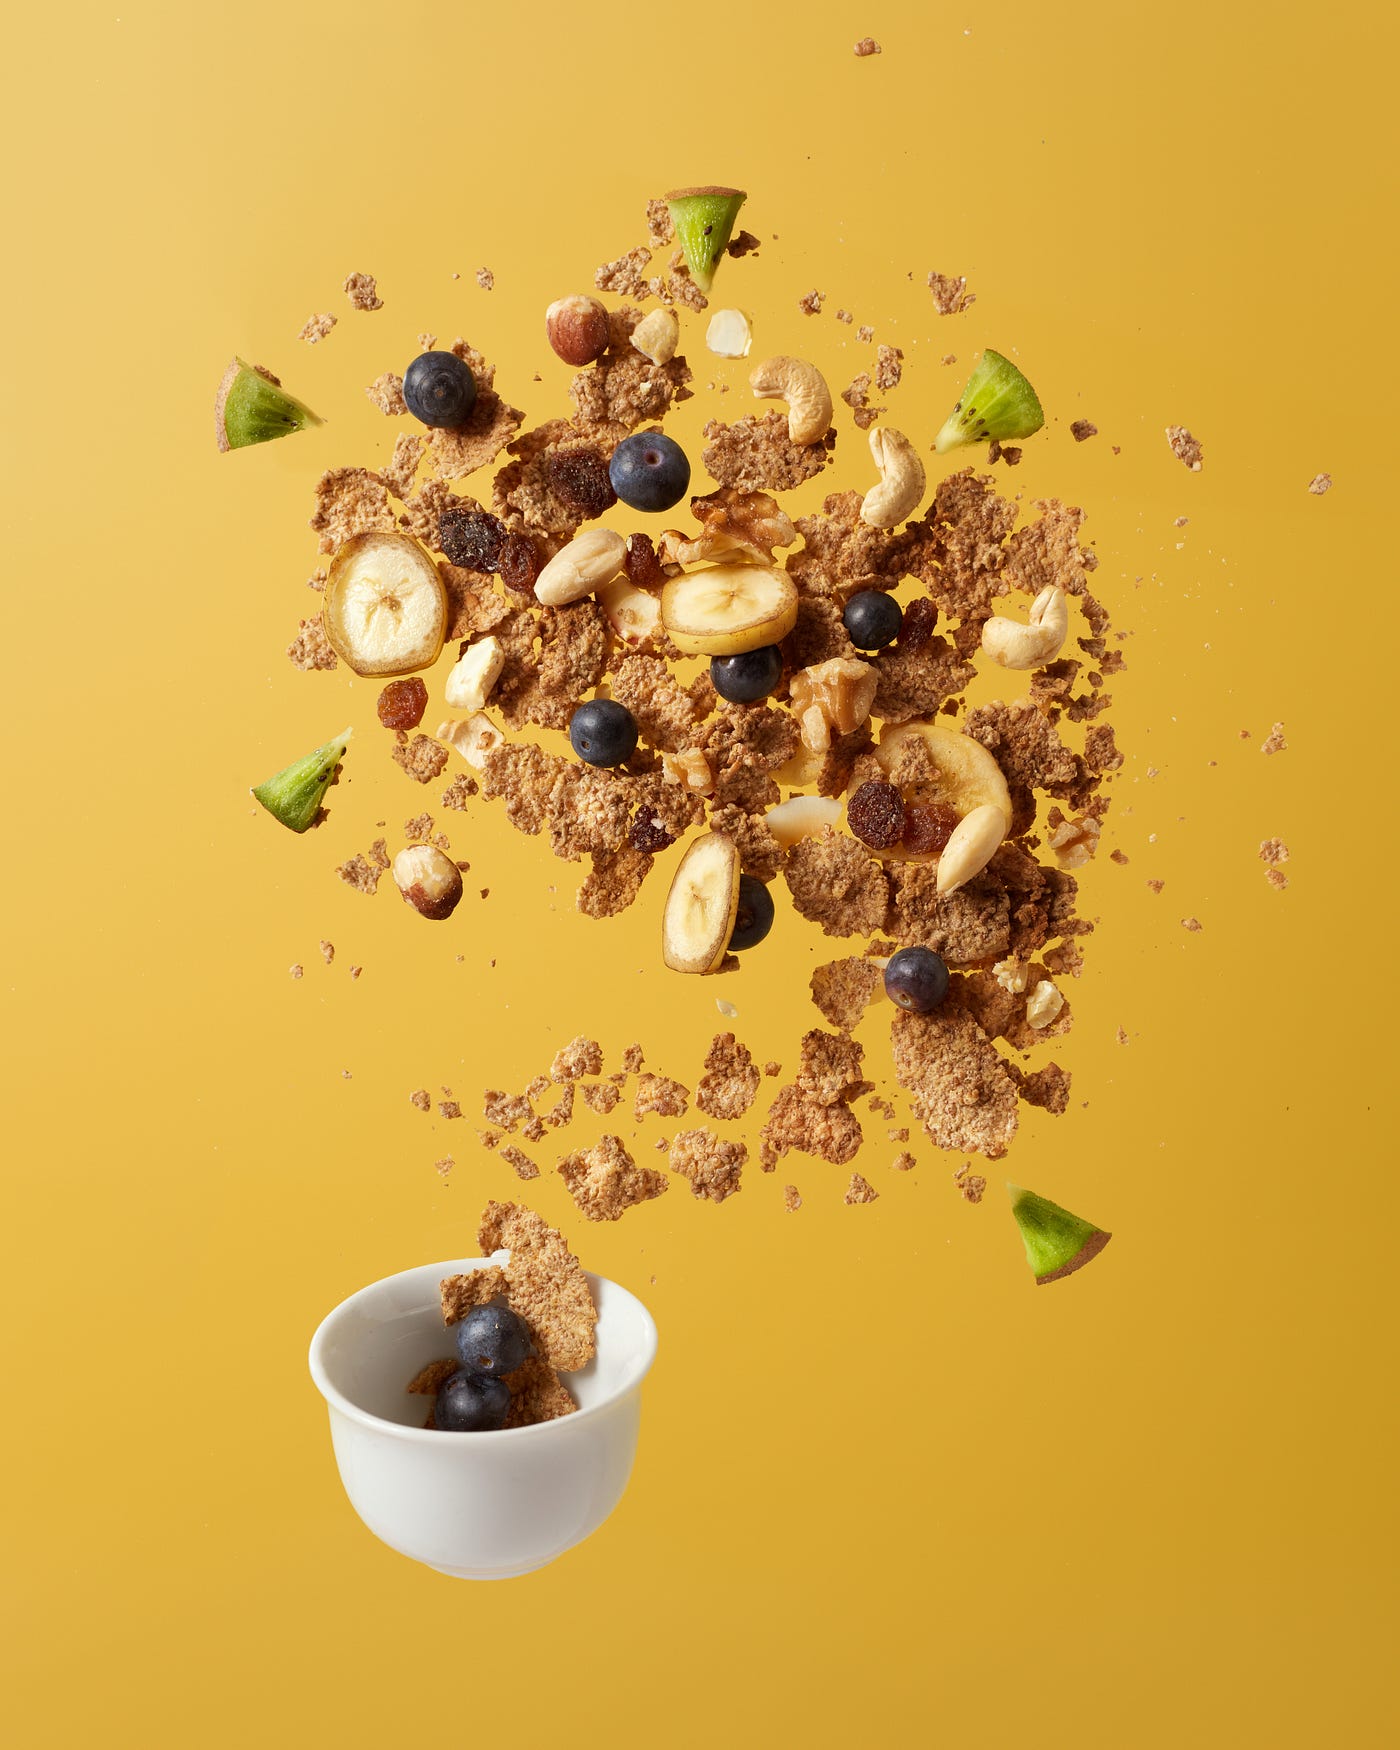 Cereal and fruits appear to spill upward from a small white bowl. ustard colored background. Calorie restriction alters methylation and causes changes that suggest slower aging.